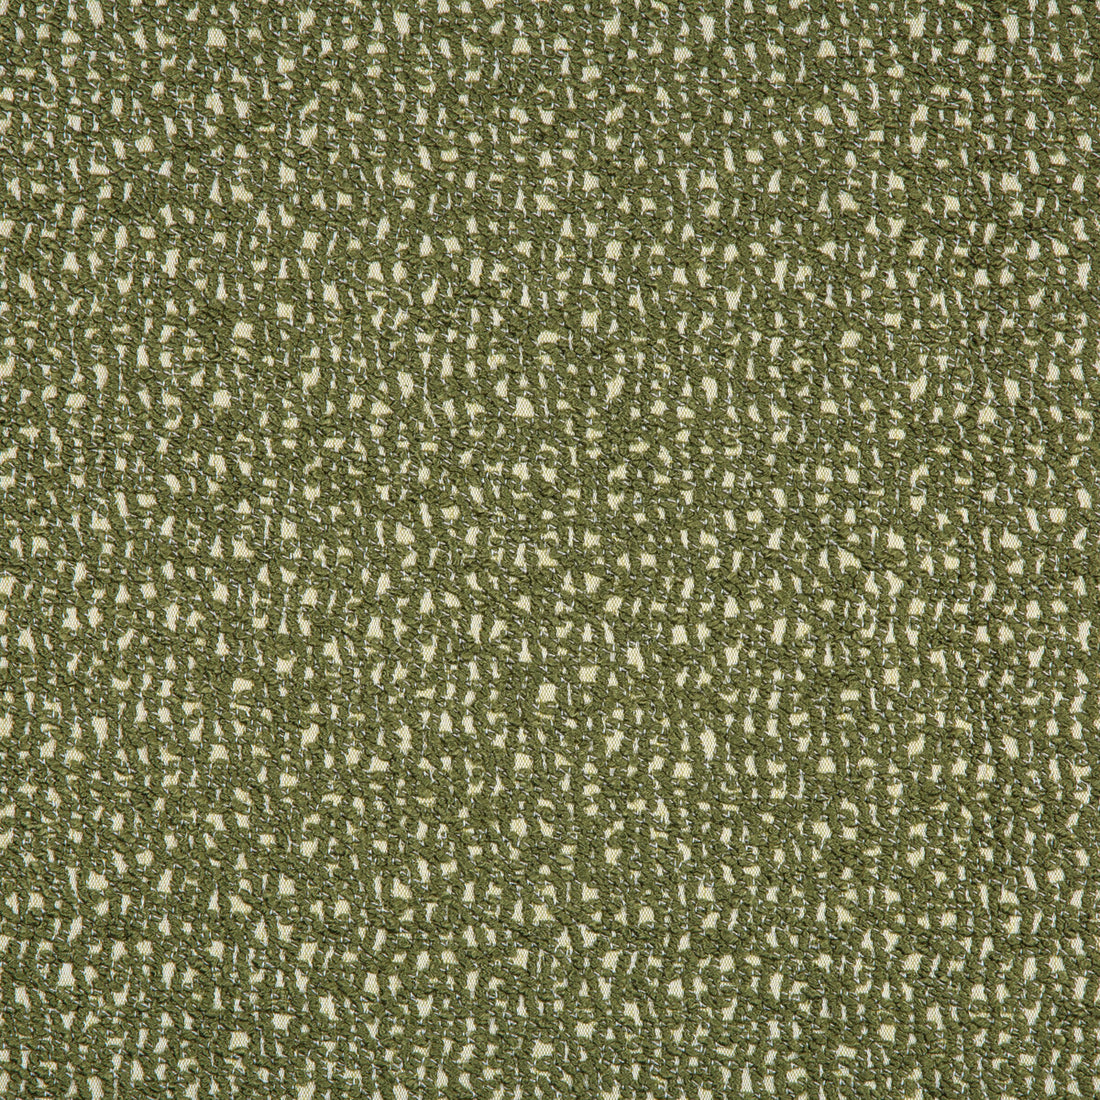 Serra fabric in chive color - pattern GWF-3783.30.0 - by Lee Jofa Modern in the Kelly Wearstler Oculum Indoor/Outdoor collection